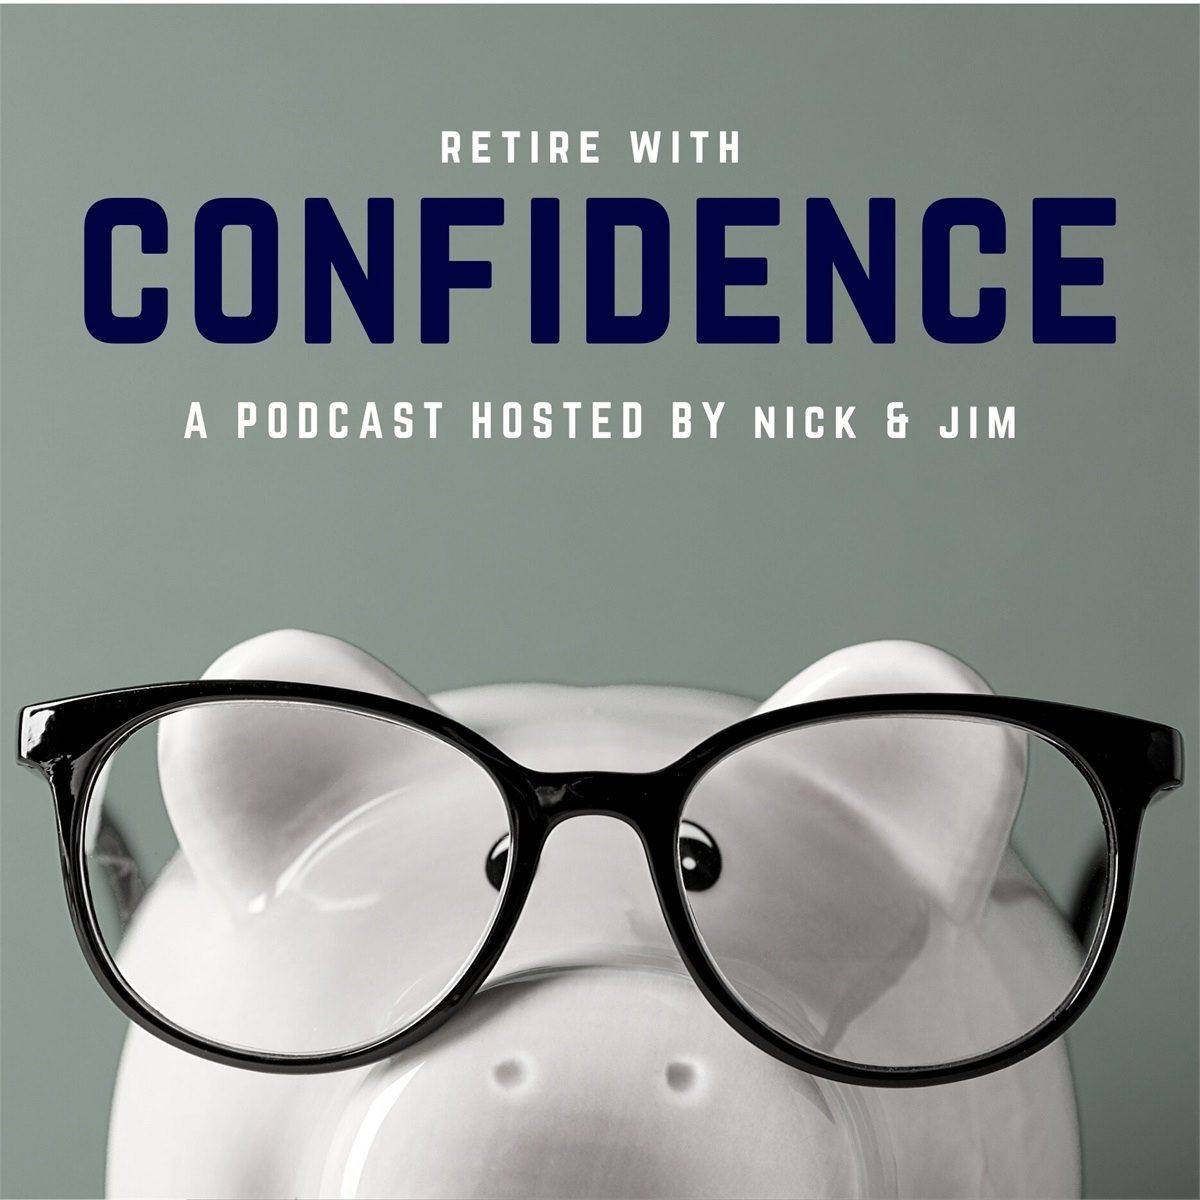 Retire With Confidence with Nick Hopwood, CFP® and Jim Pilat, AIF®